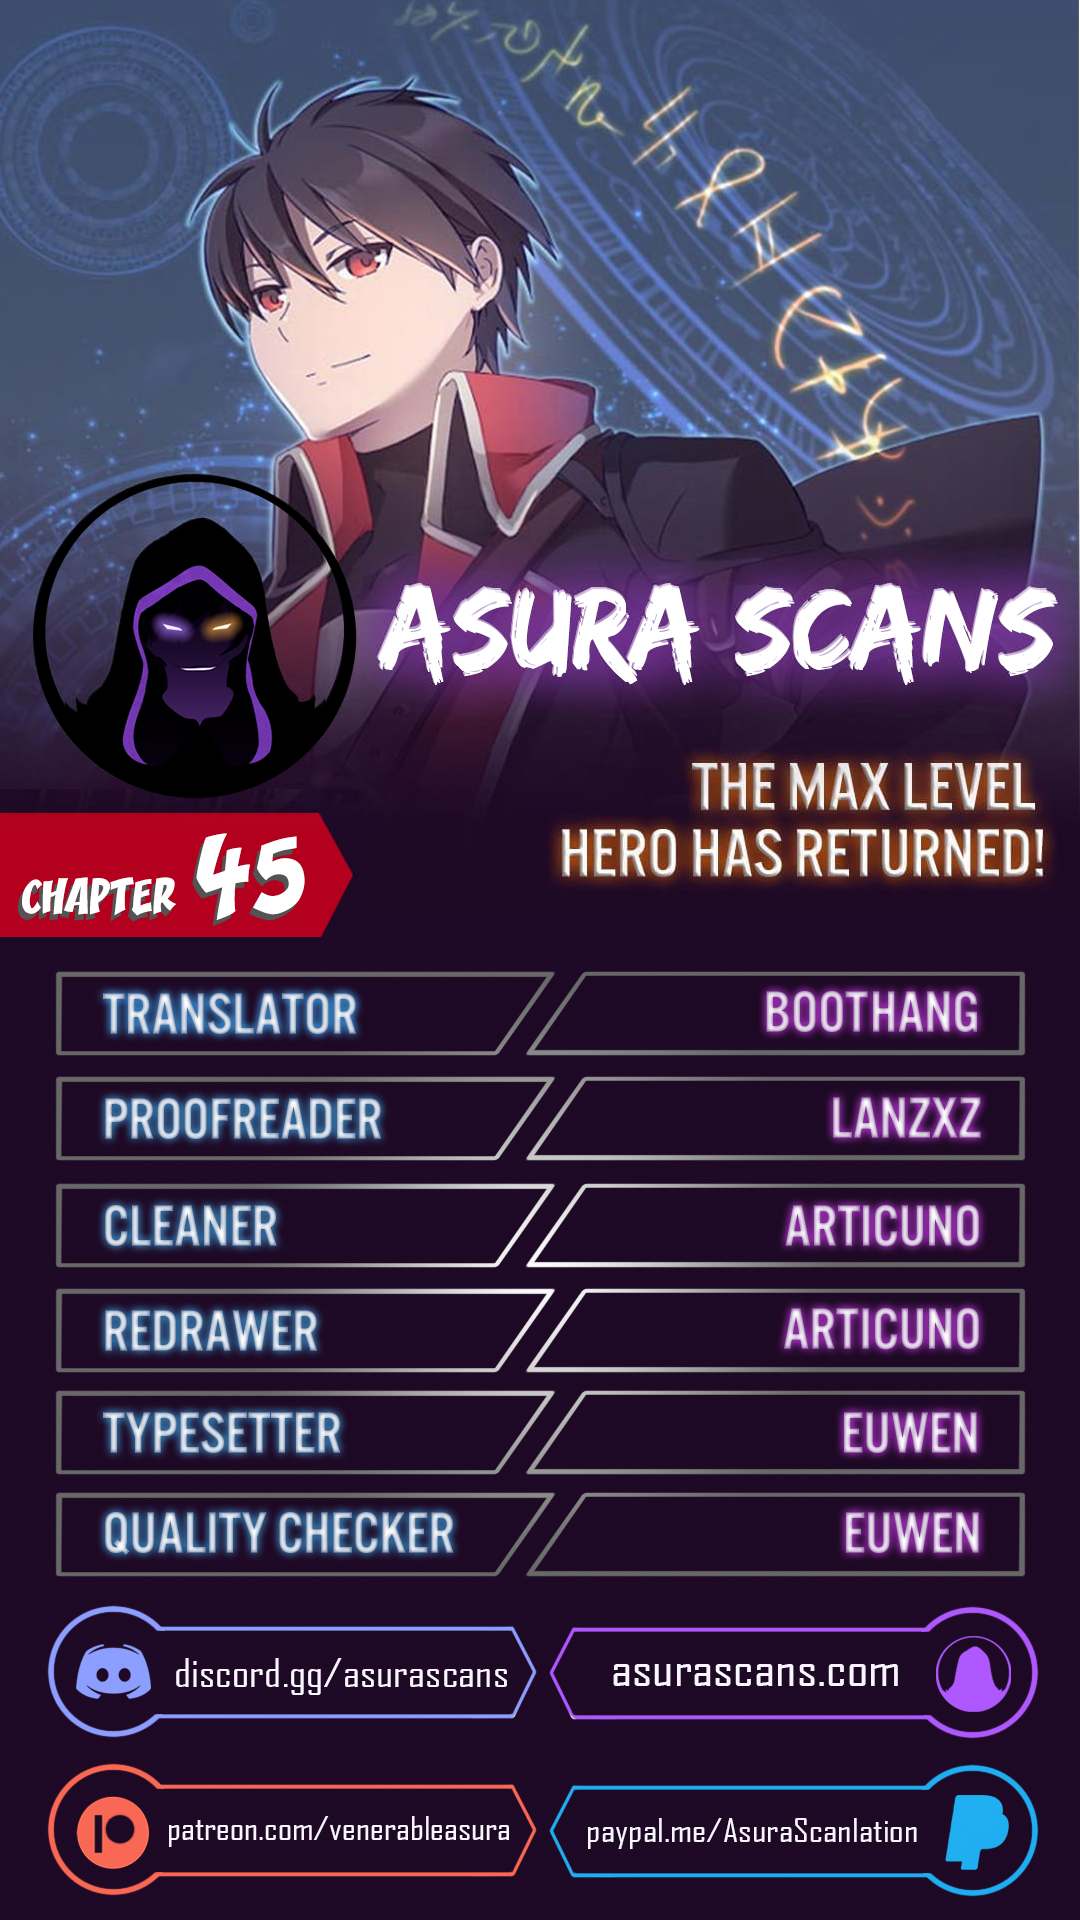 The MAX leveled hero will return! Chapter 45